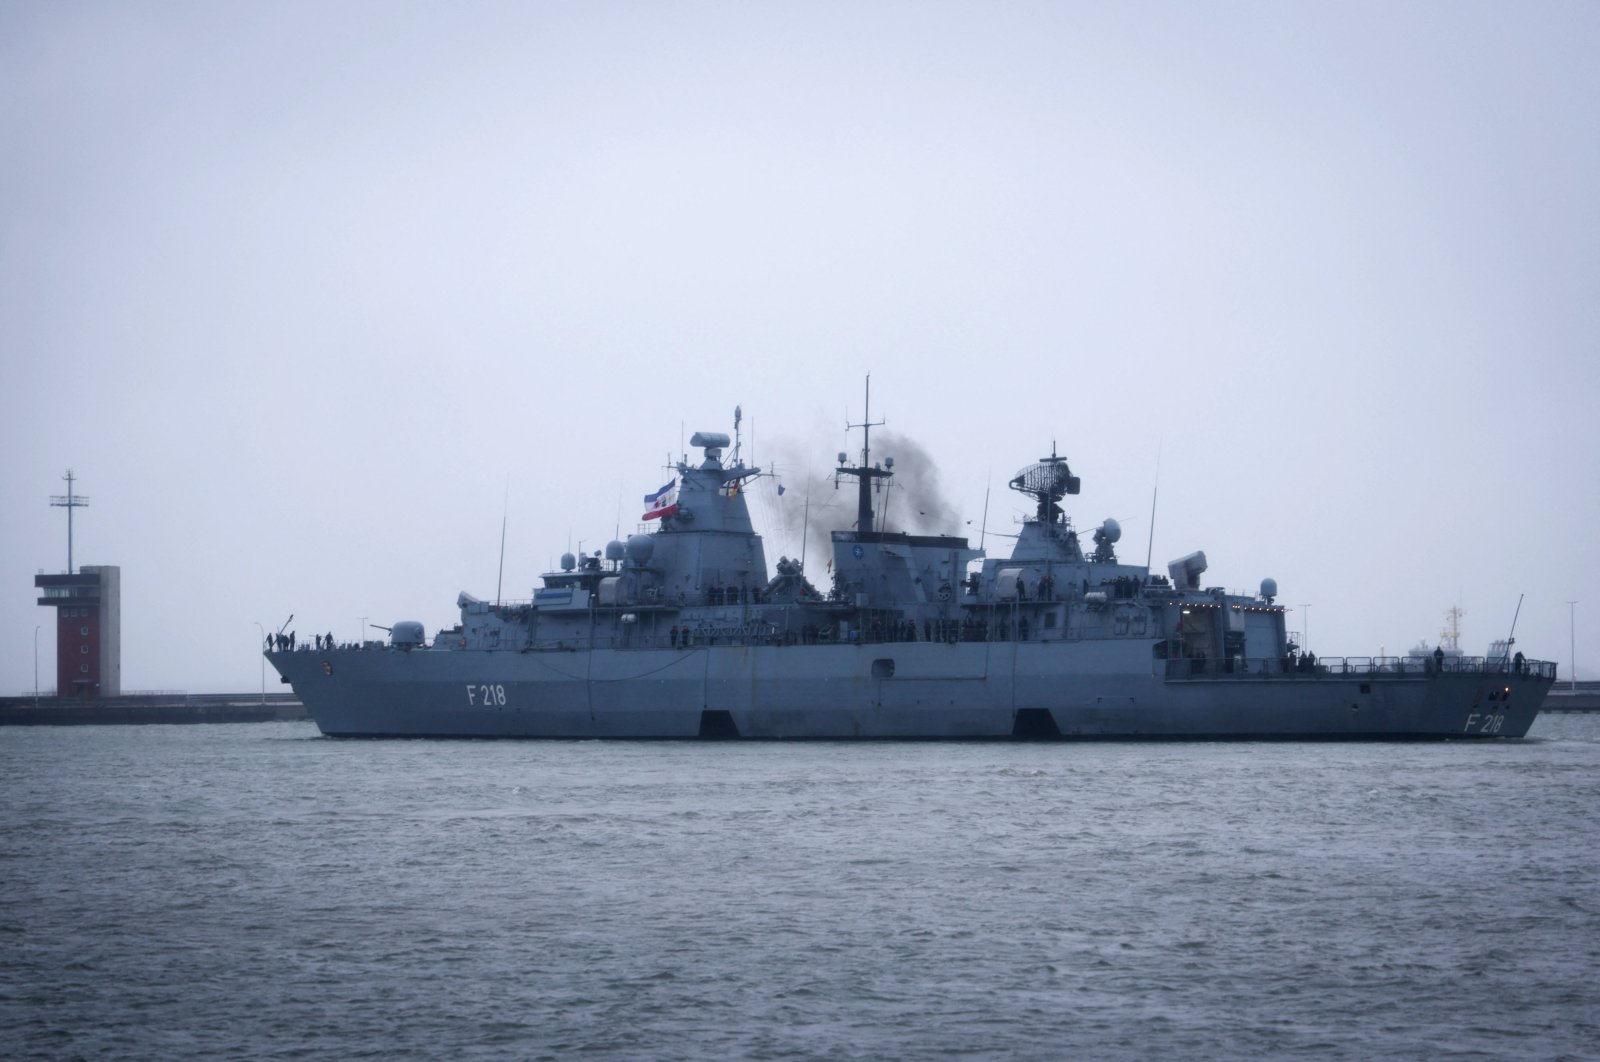 The frigate F 218 Mecklenburg-Vorpommern of the German Navy leaves its home port in Wilhelmshaven, northwestern Germany, for the NATO Very High Readiness Joint Task Force (VJTF), Jan. 4, 2023. (AFP File Photo)